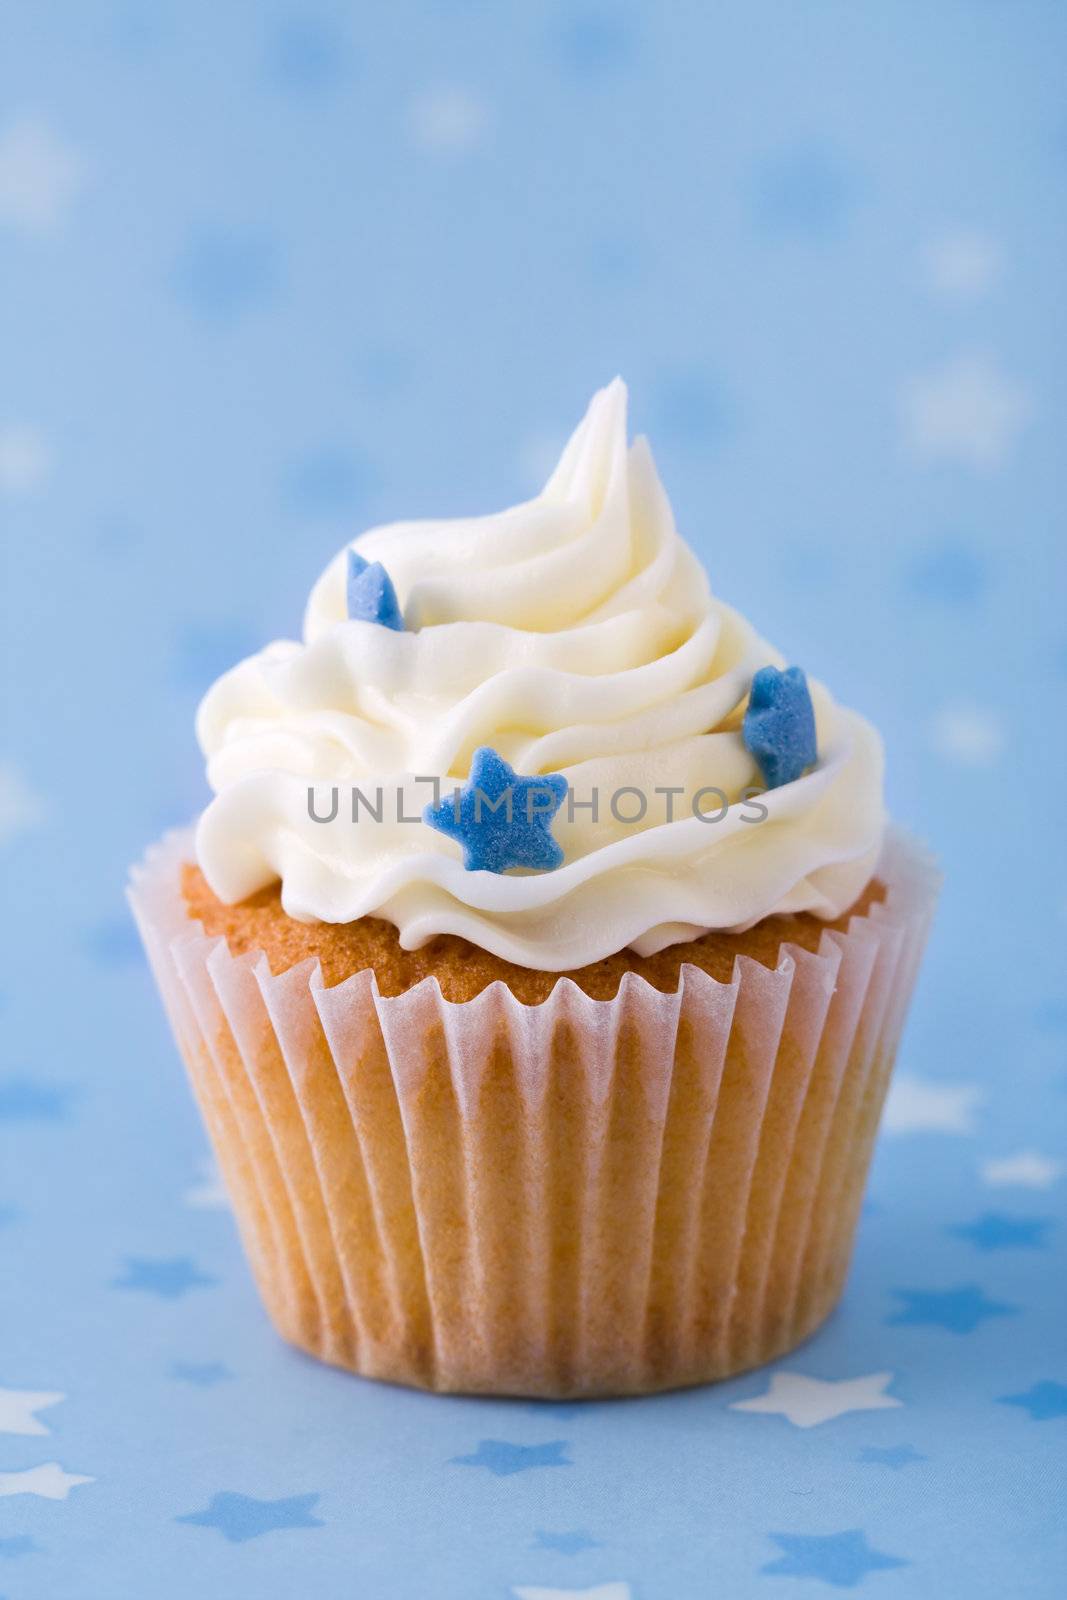 Cupcake decorated with blue sugar stars